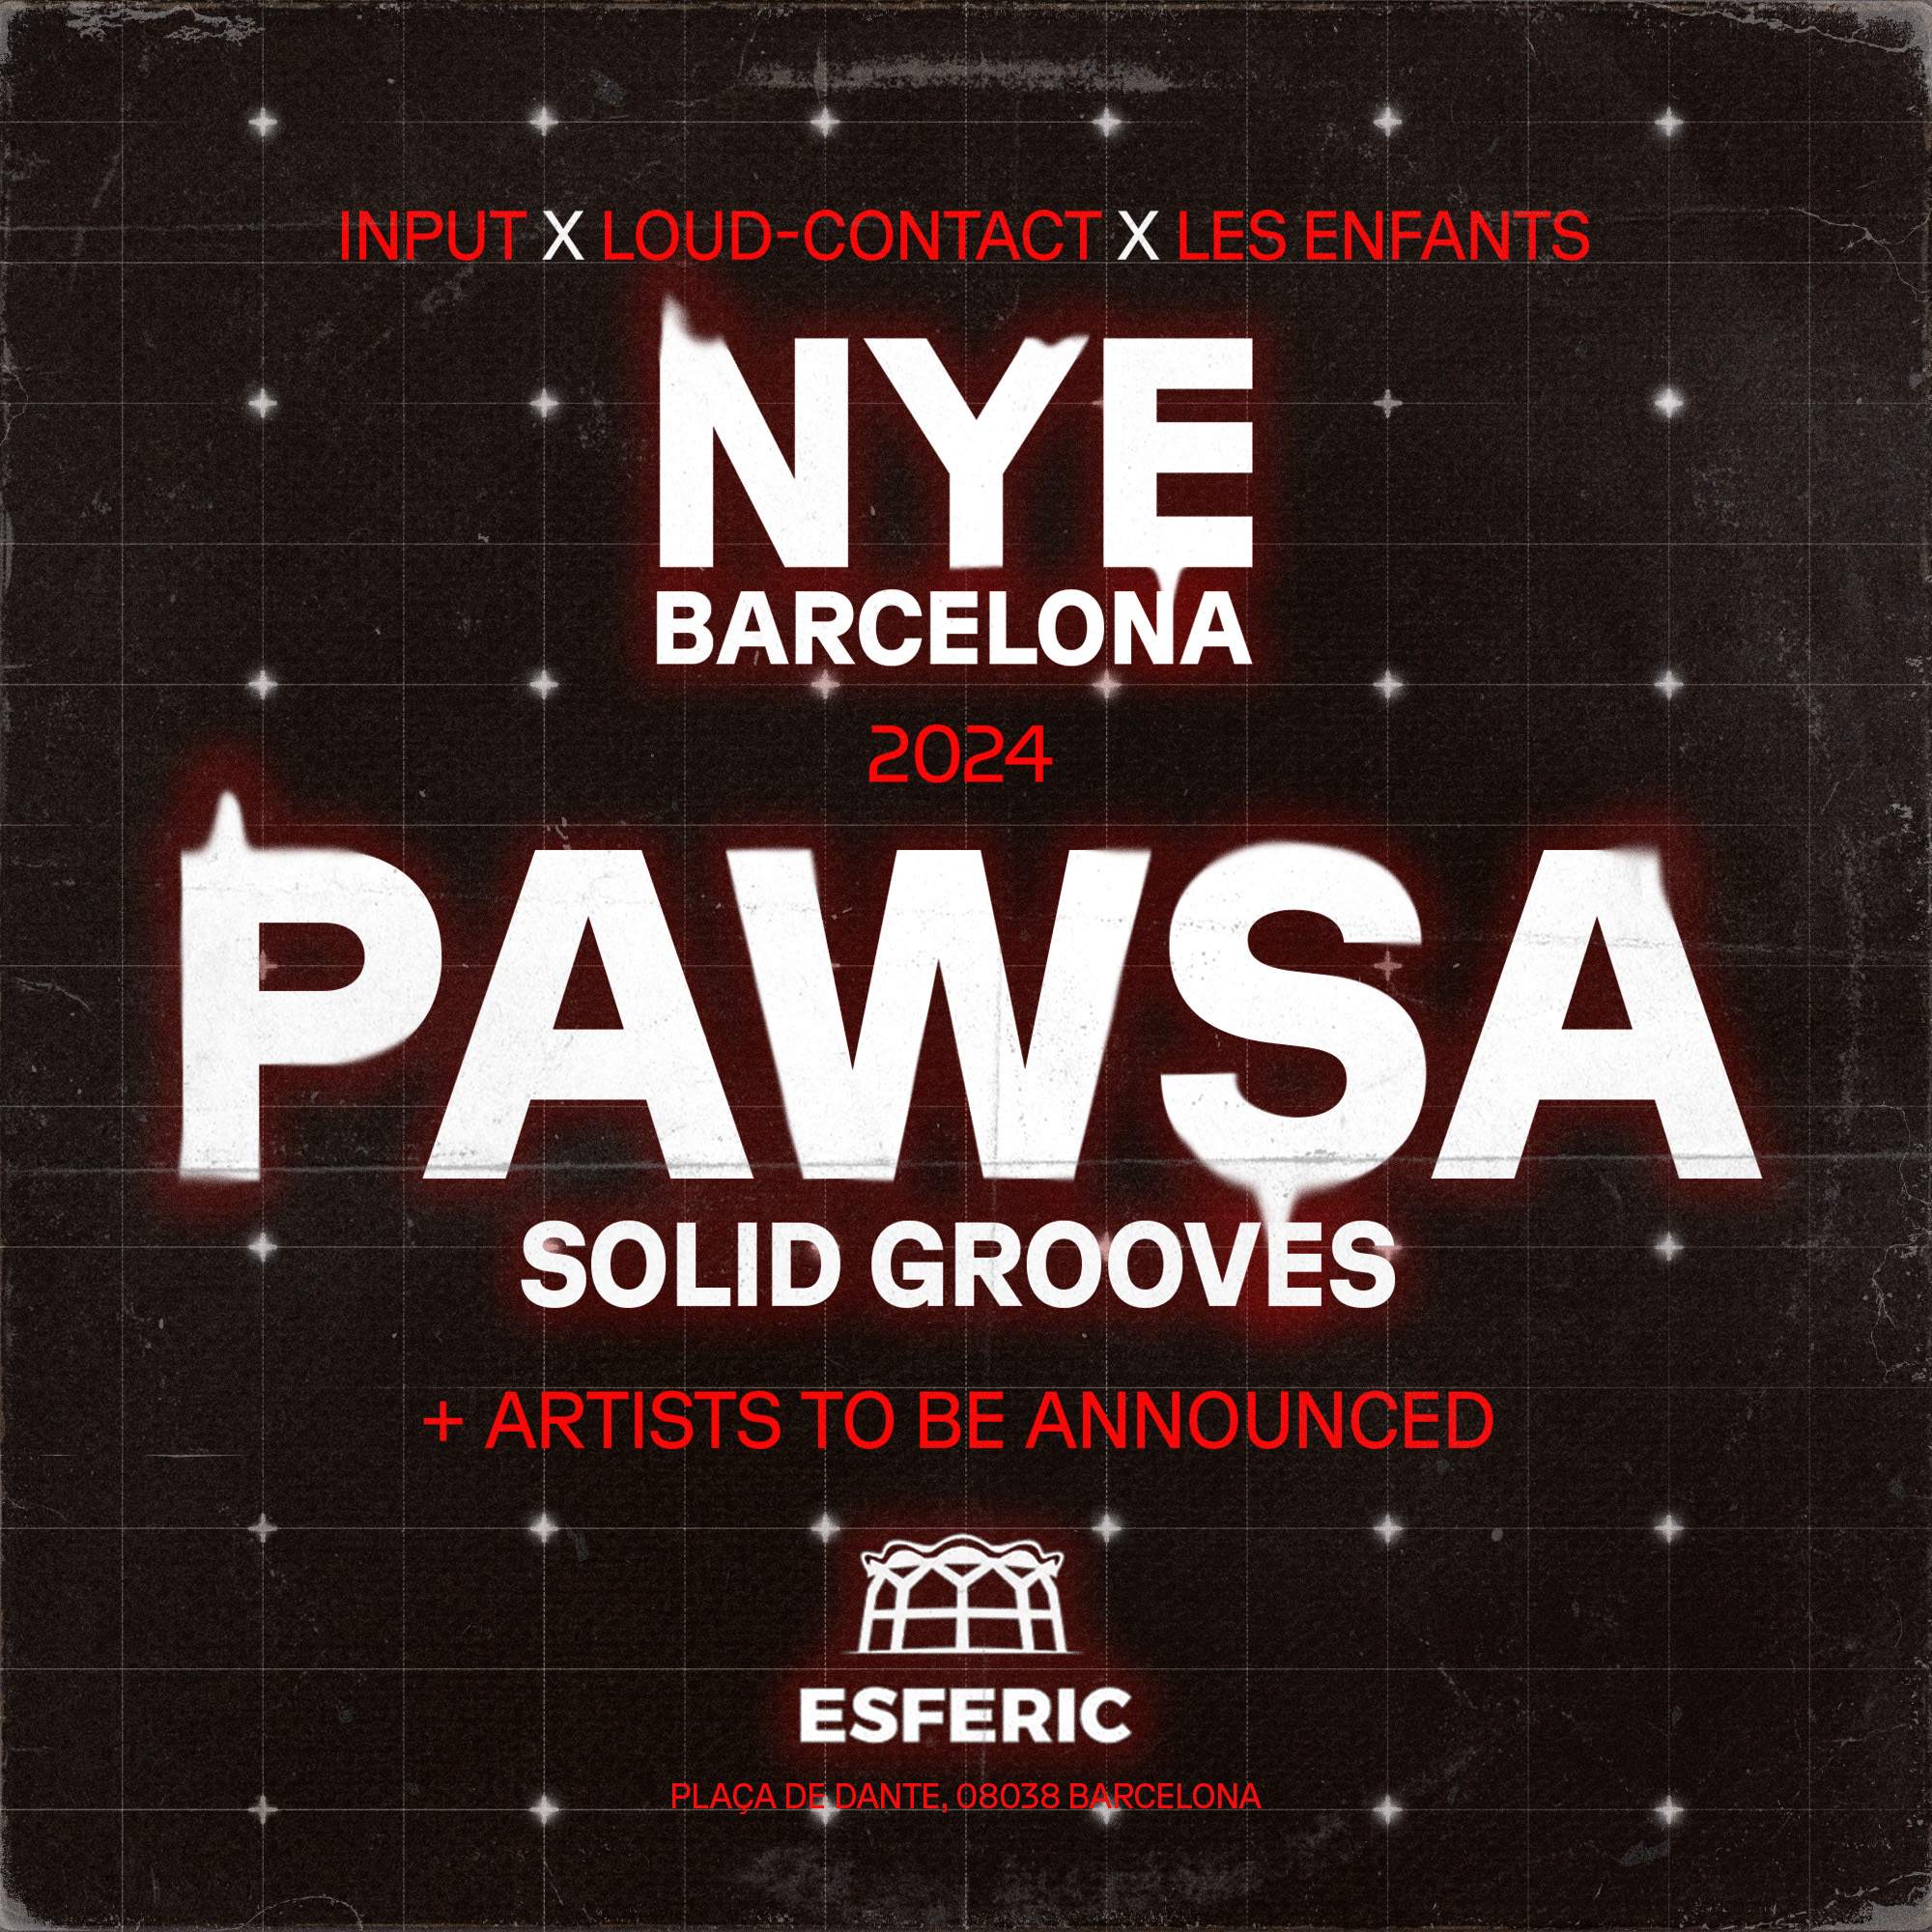 NYE Barcelona with PAWSA at Esferic (SOLD OUT) - フライヤー裏